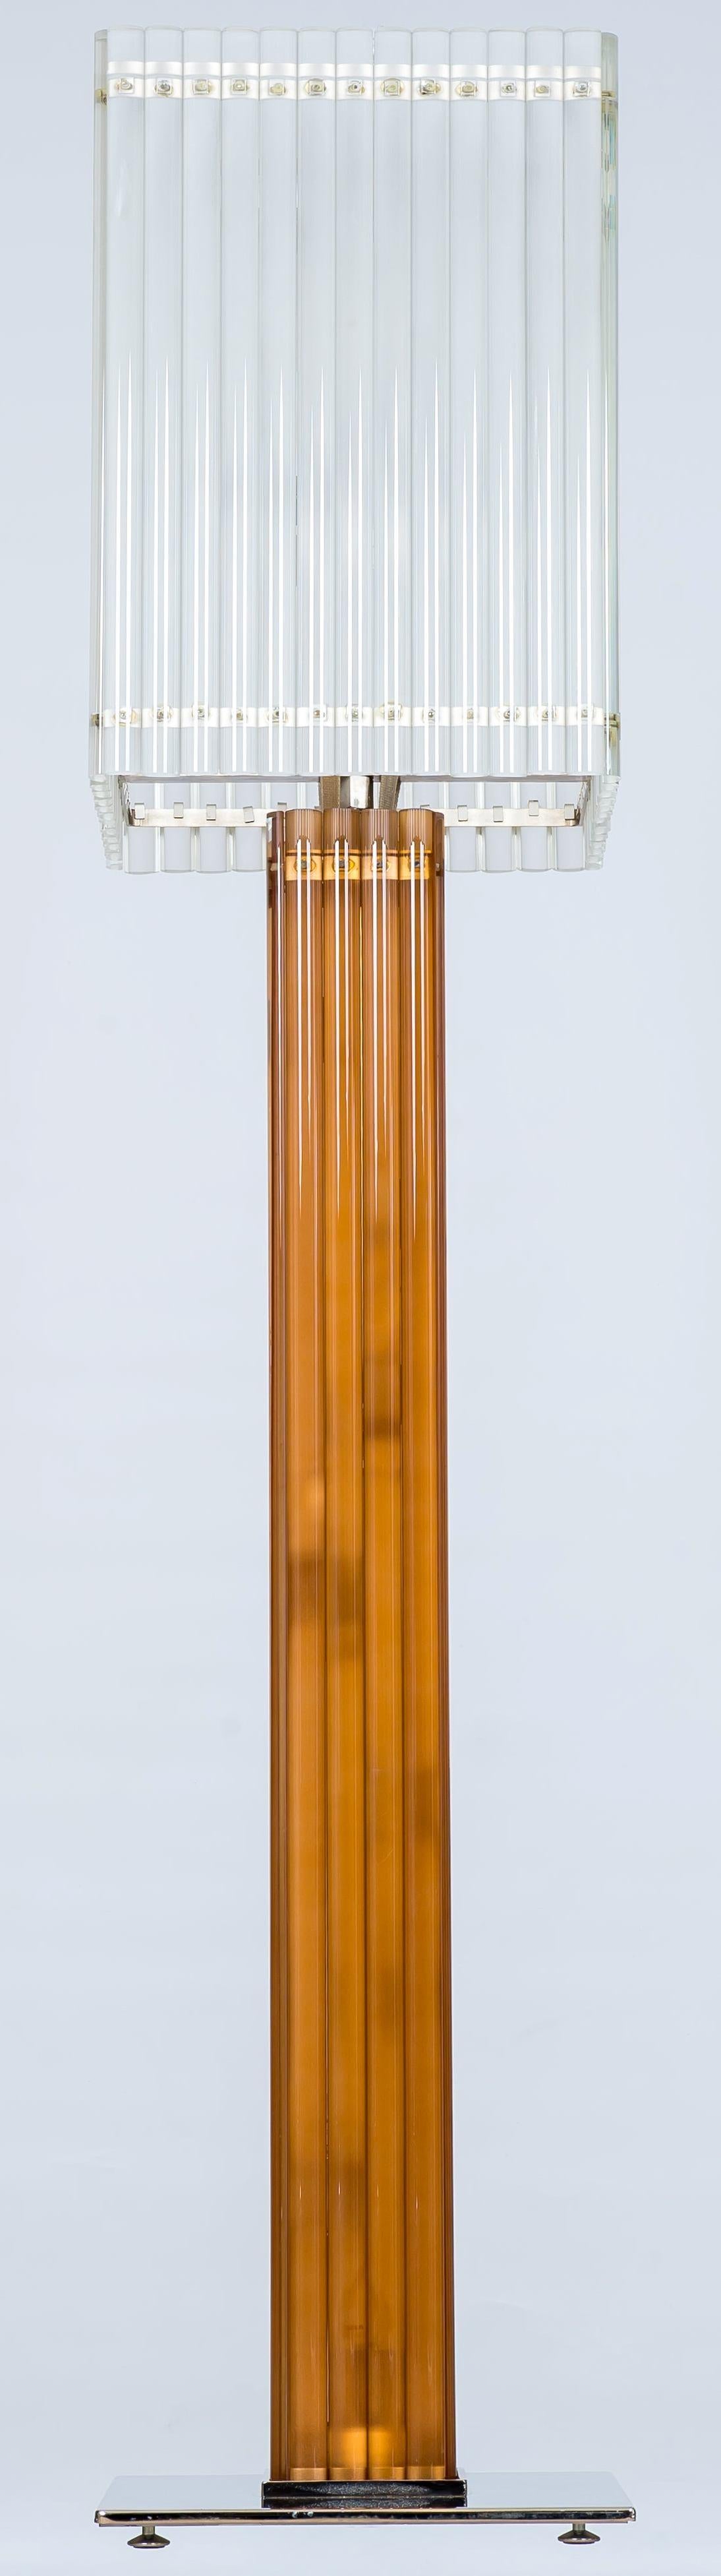 Murano glass deco floor lamp with sandblast and amber color, Italy
This astonishing Murano glass floor  lamp is made of two larger geometrical elements in two different colors and proportions. The two elements enact an enchanting interplay of colors